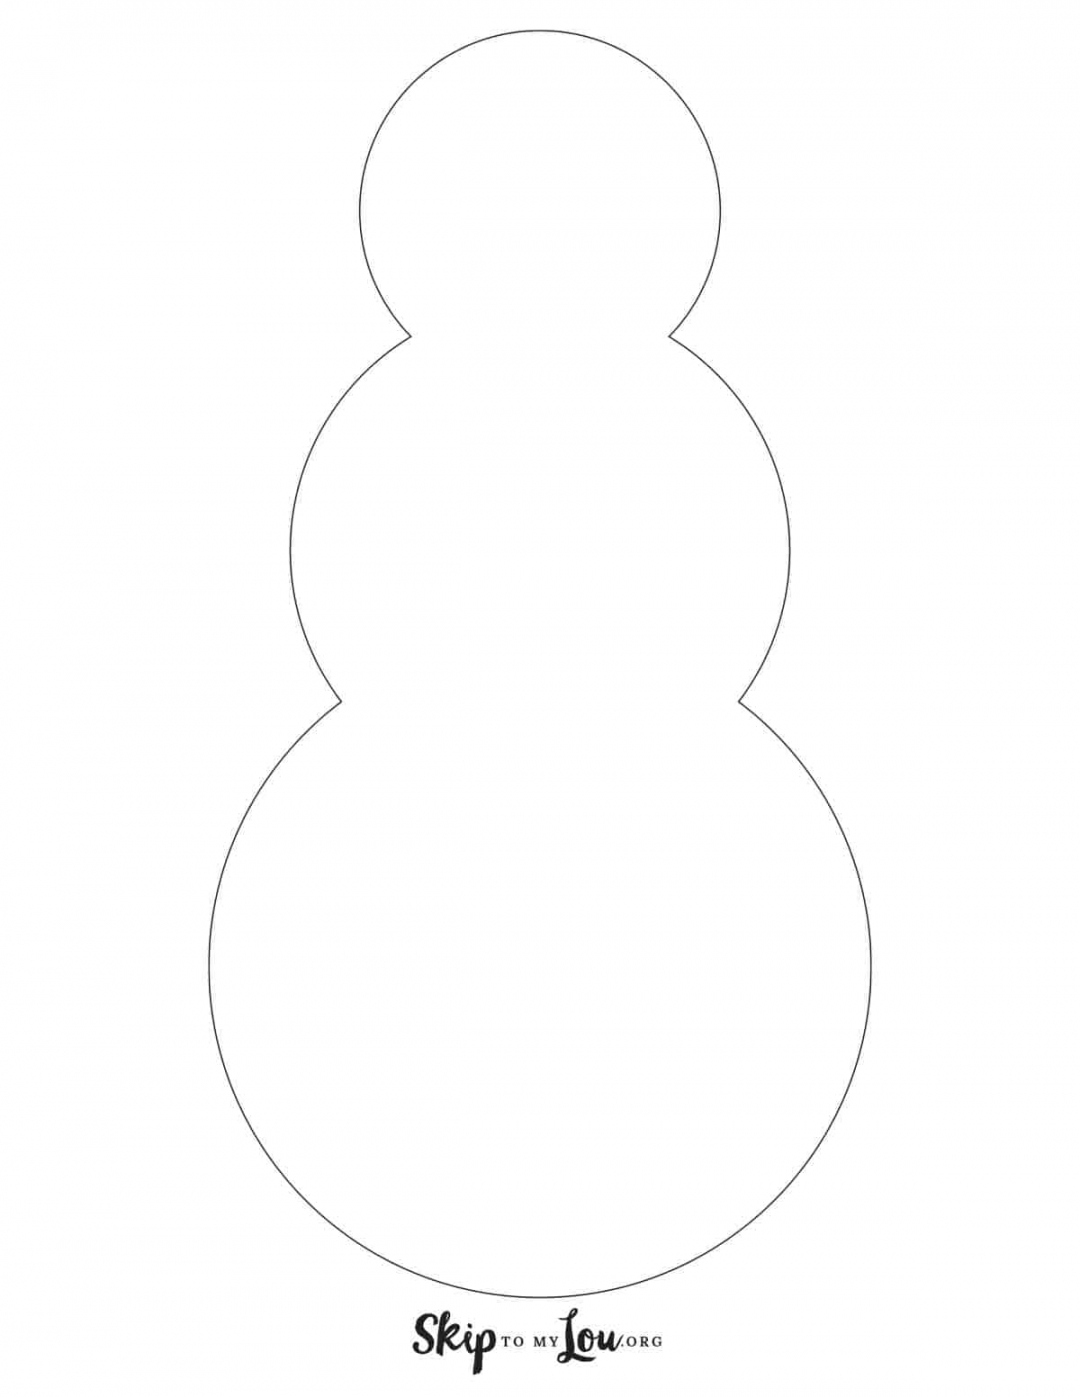 Free Printable Snowman Templates for Crafts  Skip To My Lou - FREE Printables - Free Printable Snowman Template